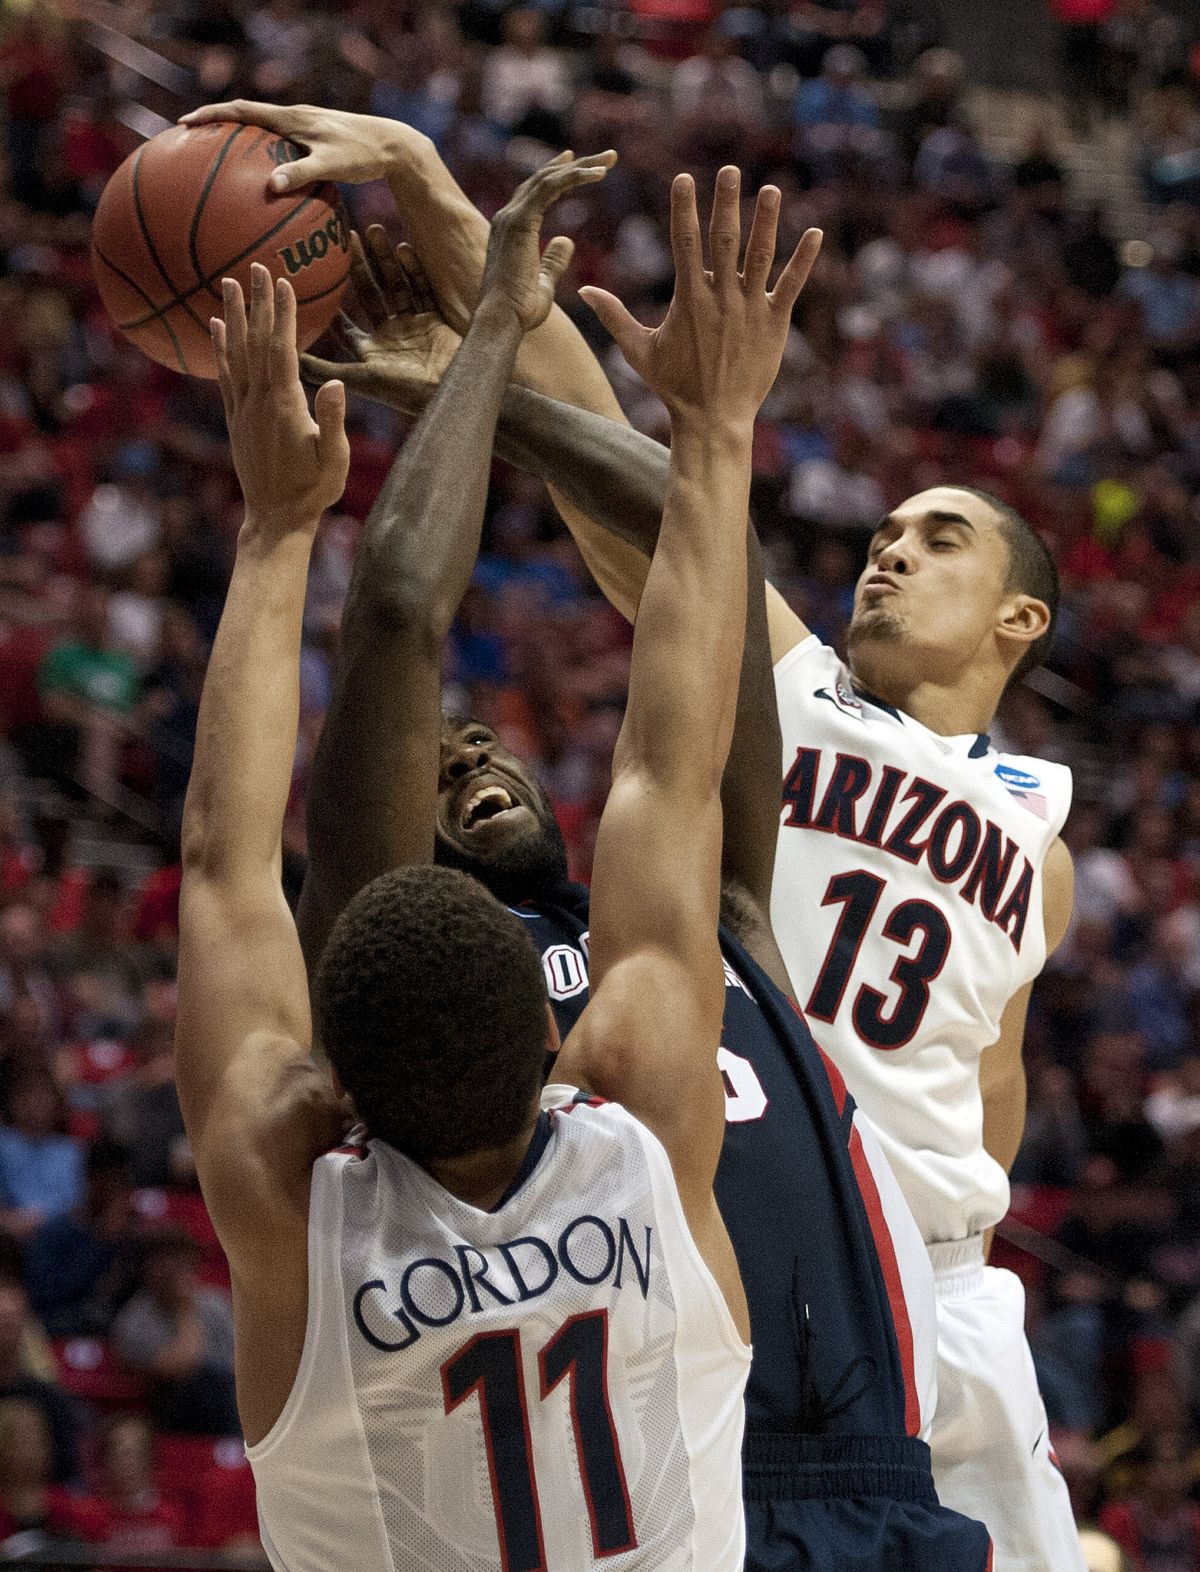 Arizona’s Aaron Gordon and Nick Johnson contest a shot by Sam Dower Jr., who scored just seven points. (Dan Pelle)